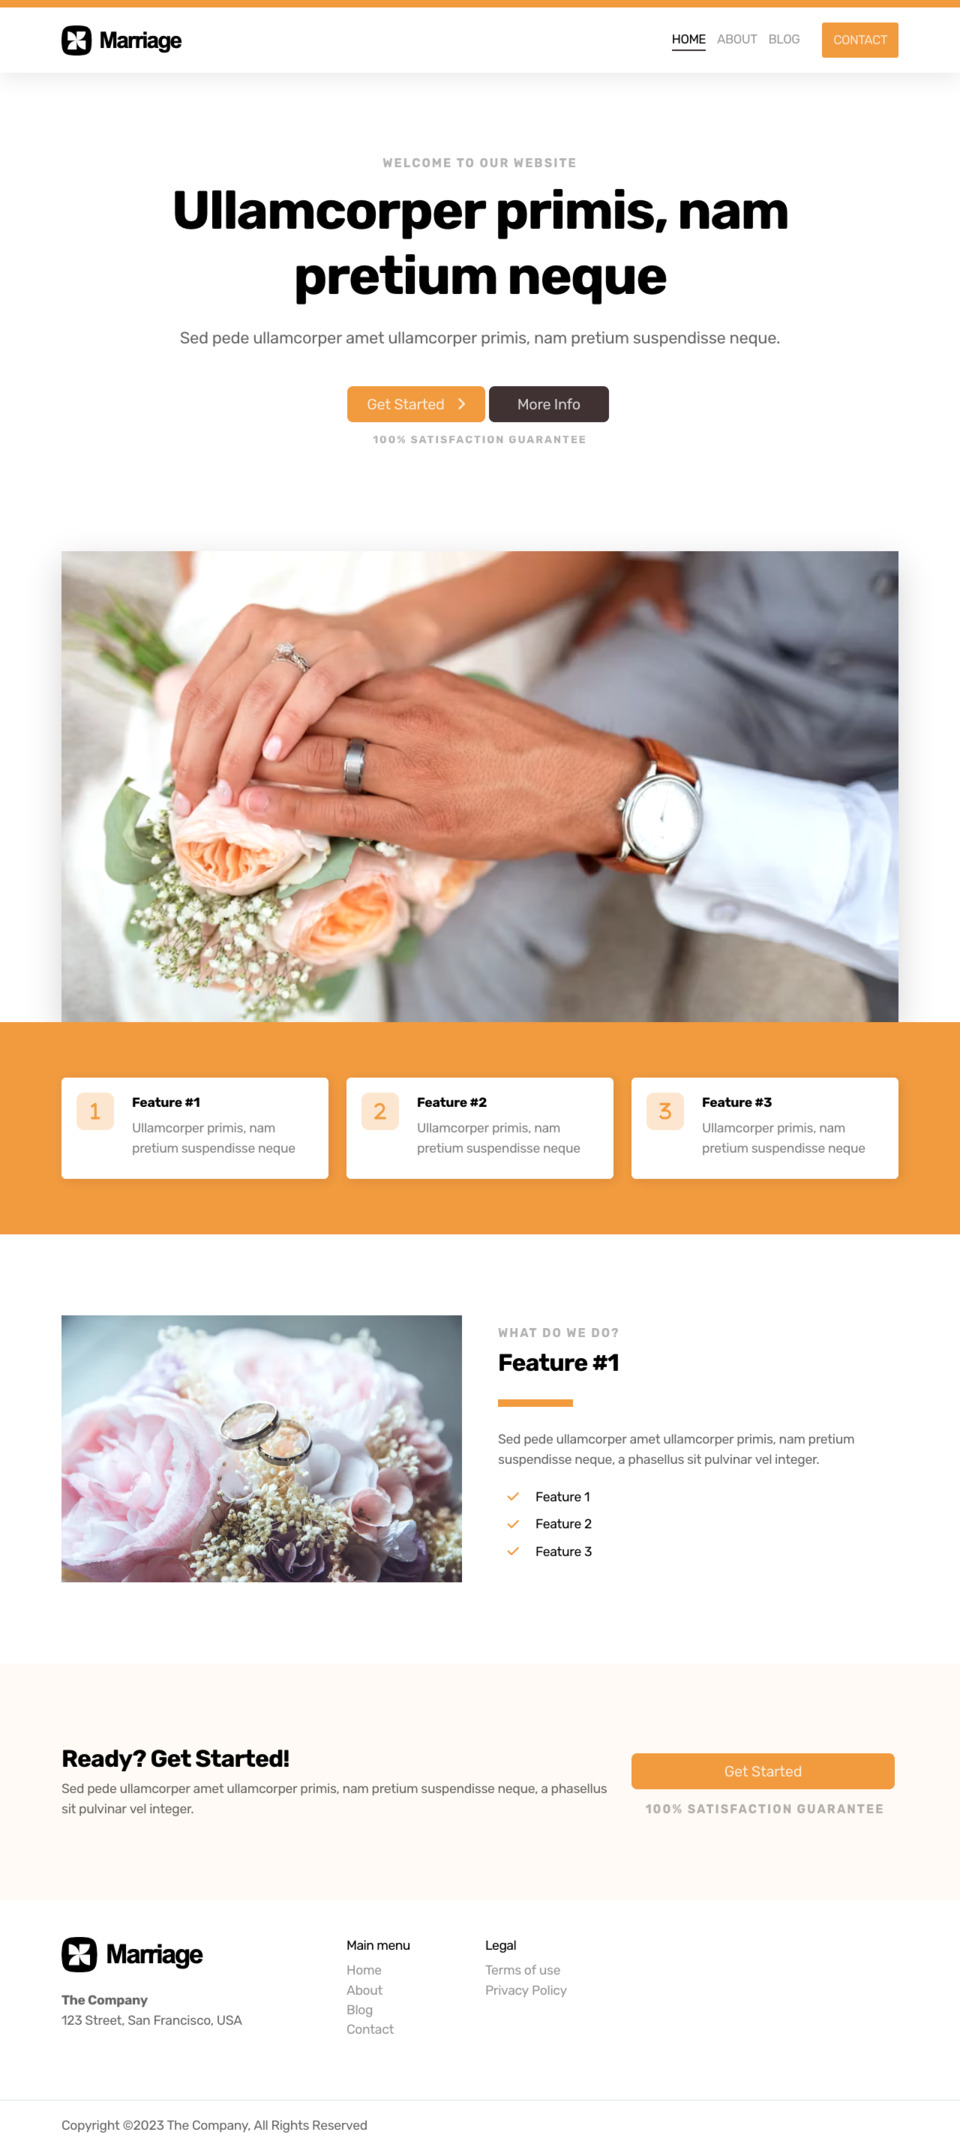 Marriage Website Template - Ideal for wedding planners, marriage counselors, relationship bloggers, love coaches, honeymoon planners, and anyone looking to create a website about love and relationships.